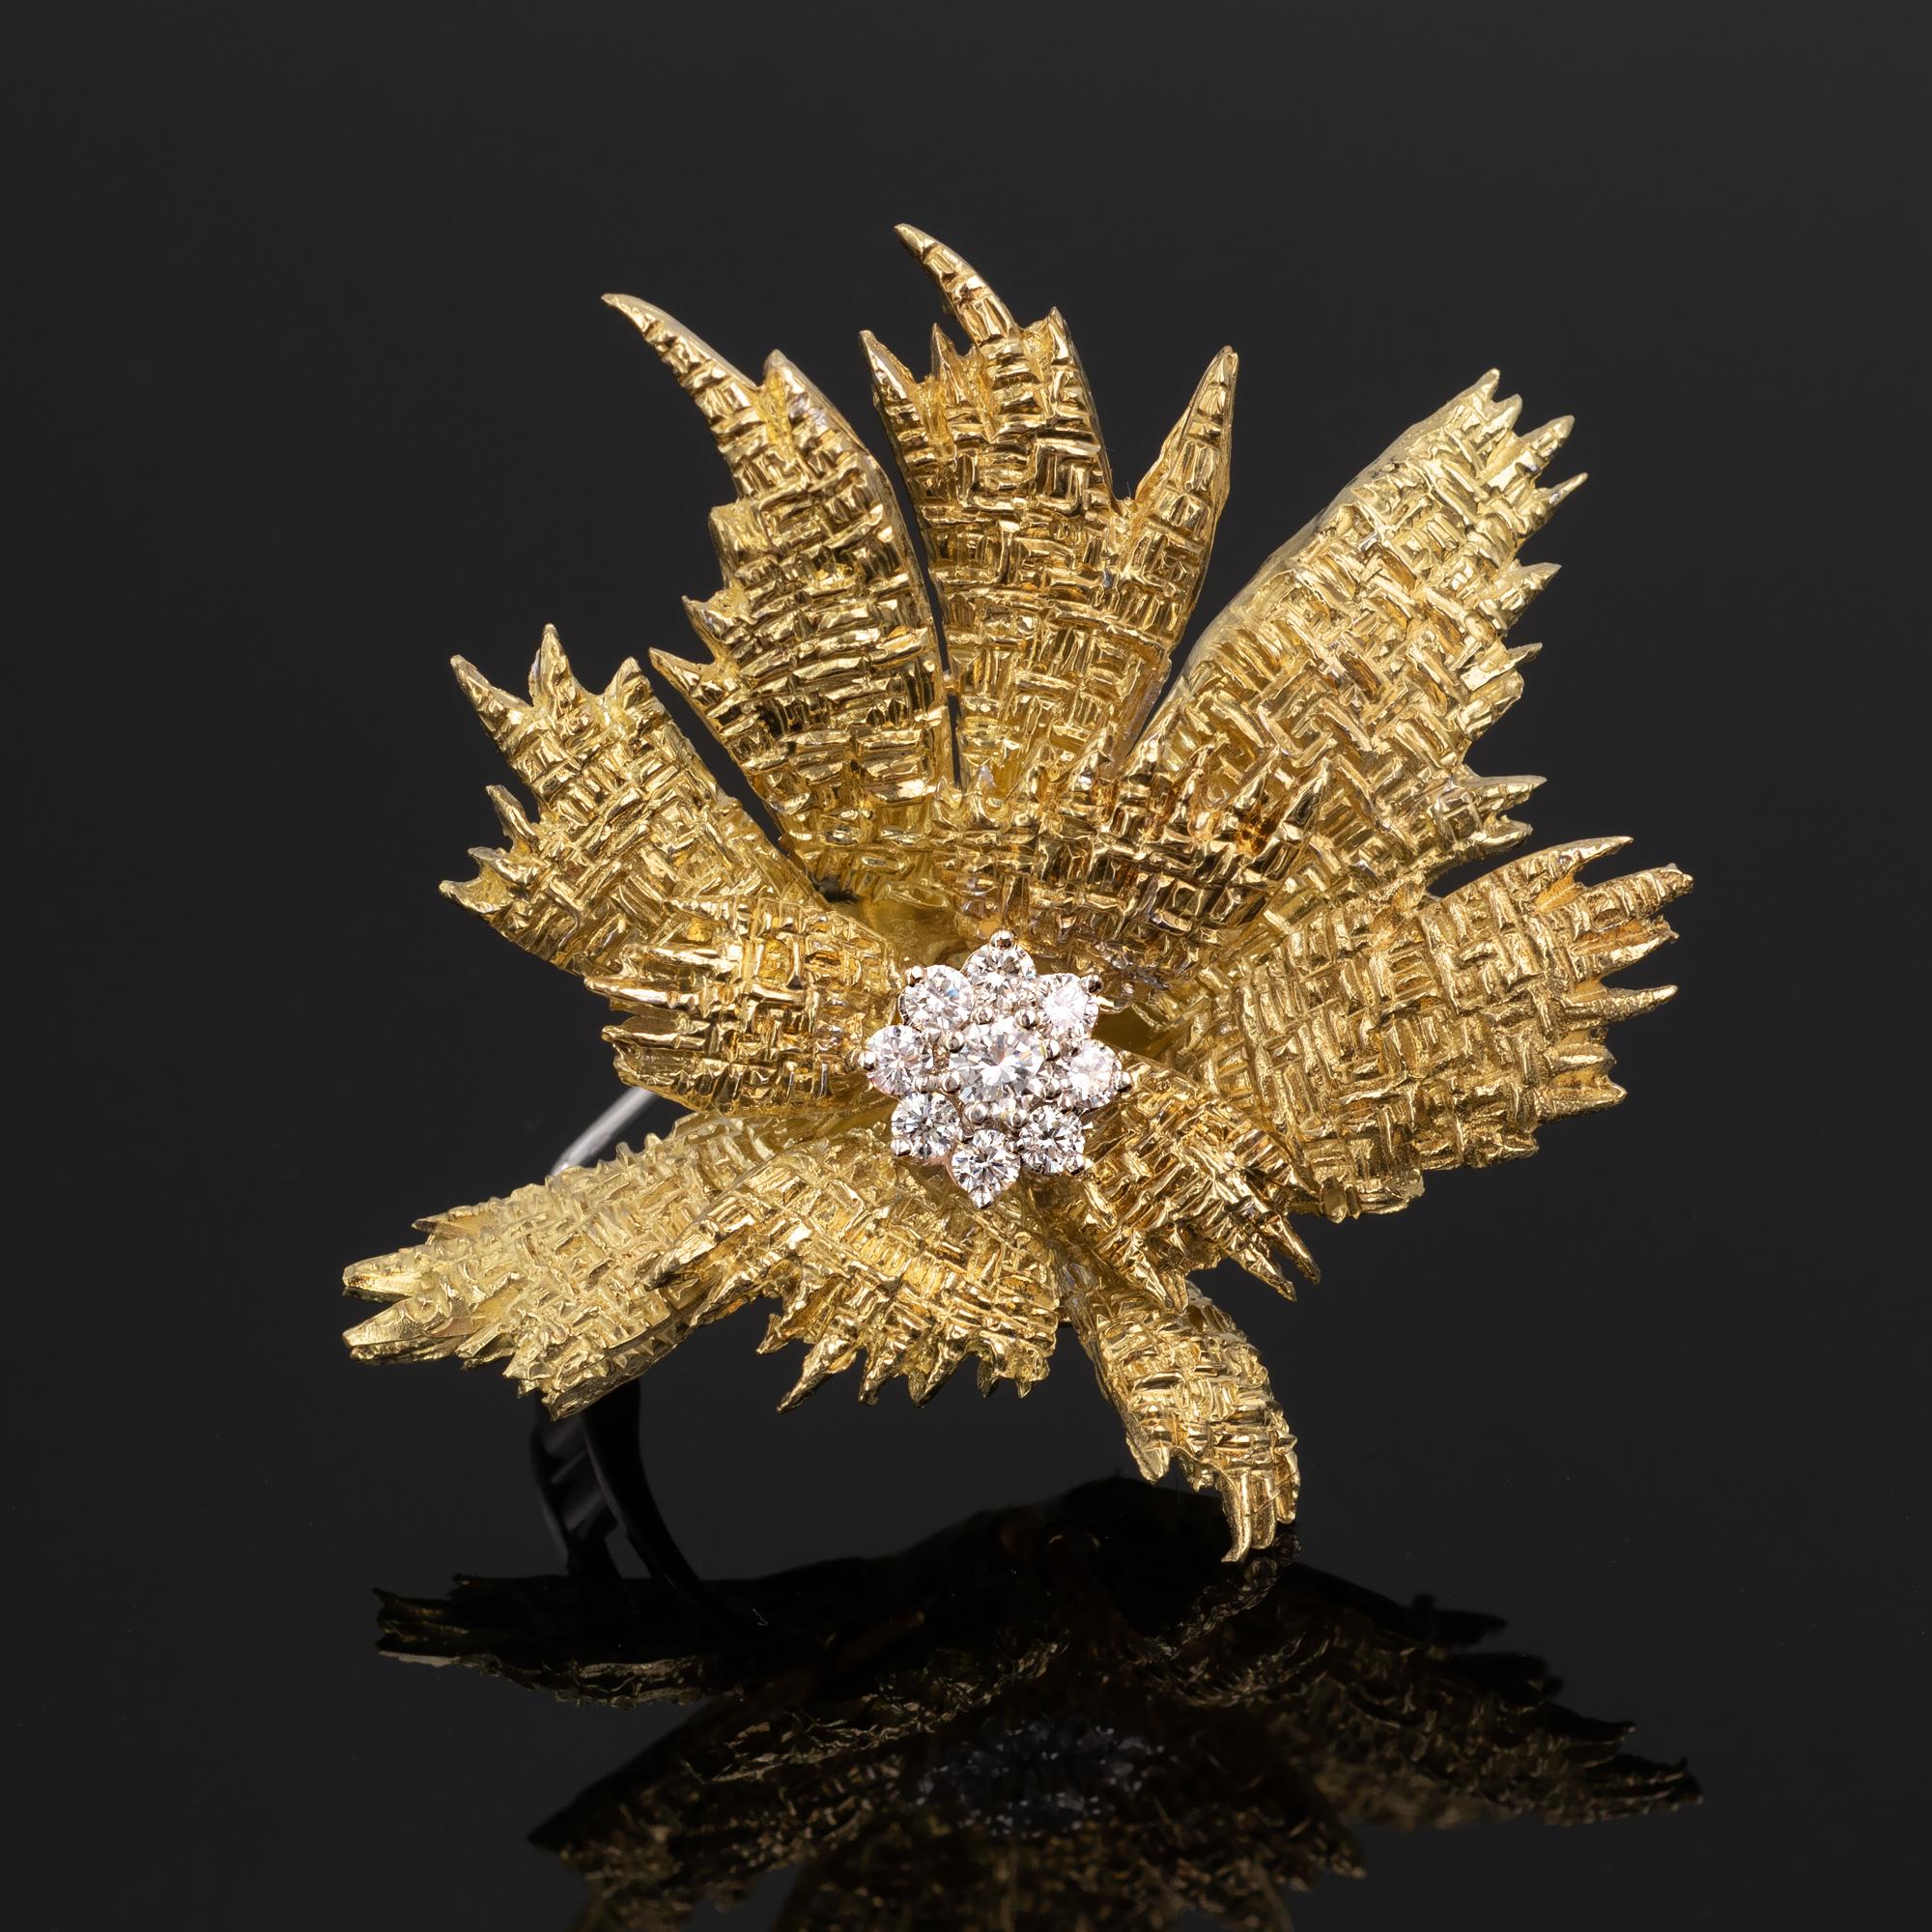 Remarkable Italian 18-karat gold and diamond brooch. A textured yellow-gold leaf with a strong design nesting in its center a cluster of top-quality diamonds ( F VVS or better). In the back, a double pin clasp with safety. It is a striking very